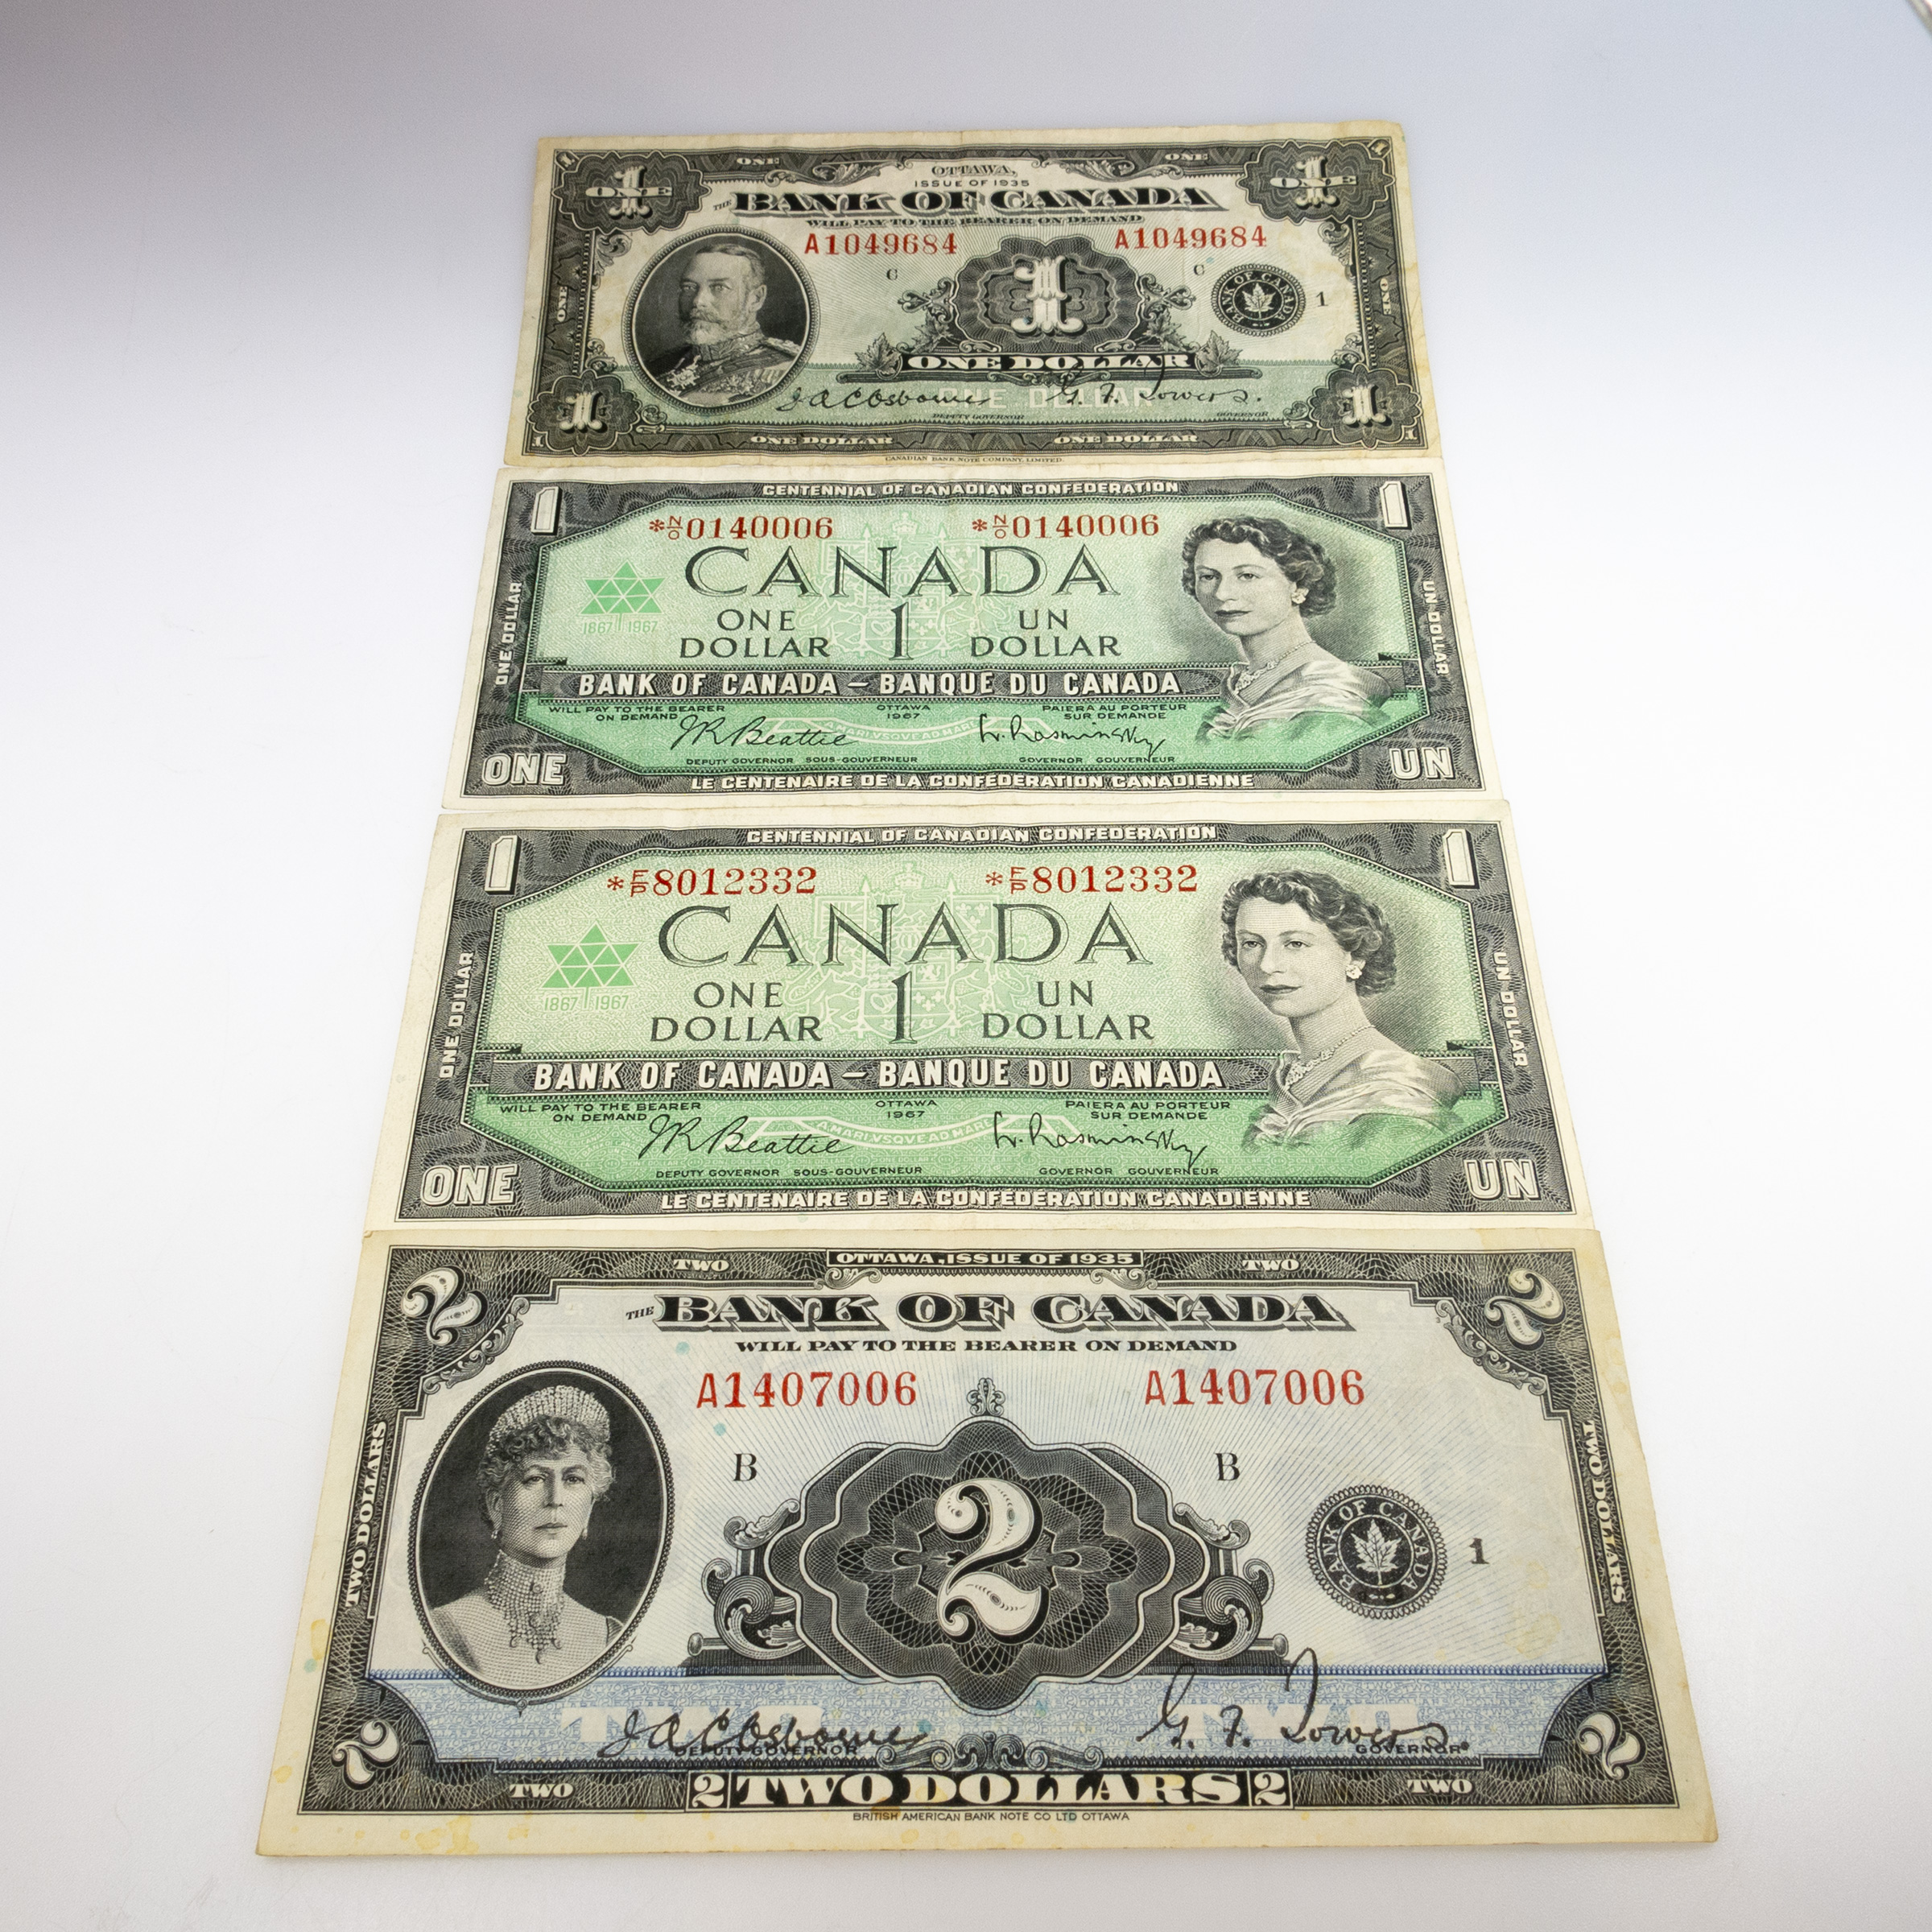 Canadian 1935 $1 And $2 Banknotes with 2 Canadian 1967 Asterisk $1 Banknotes